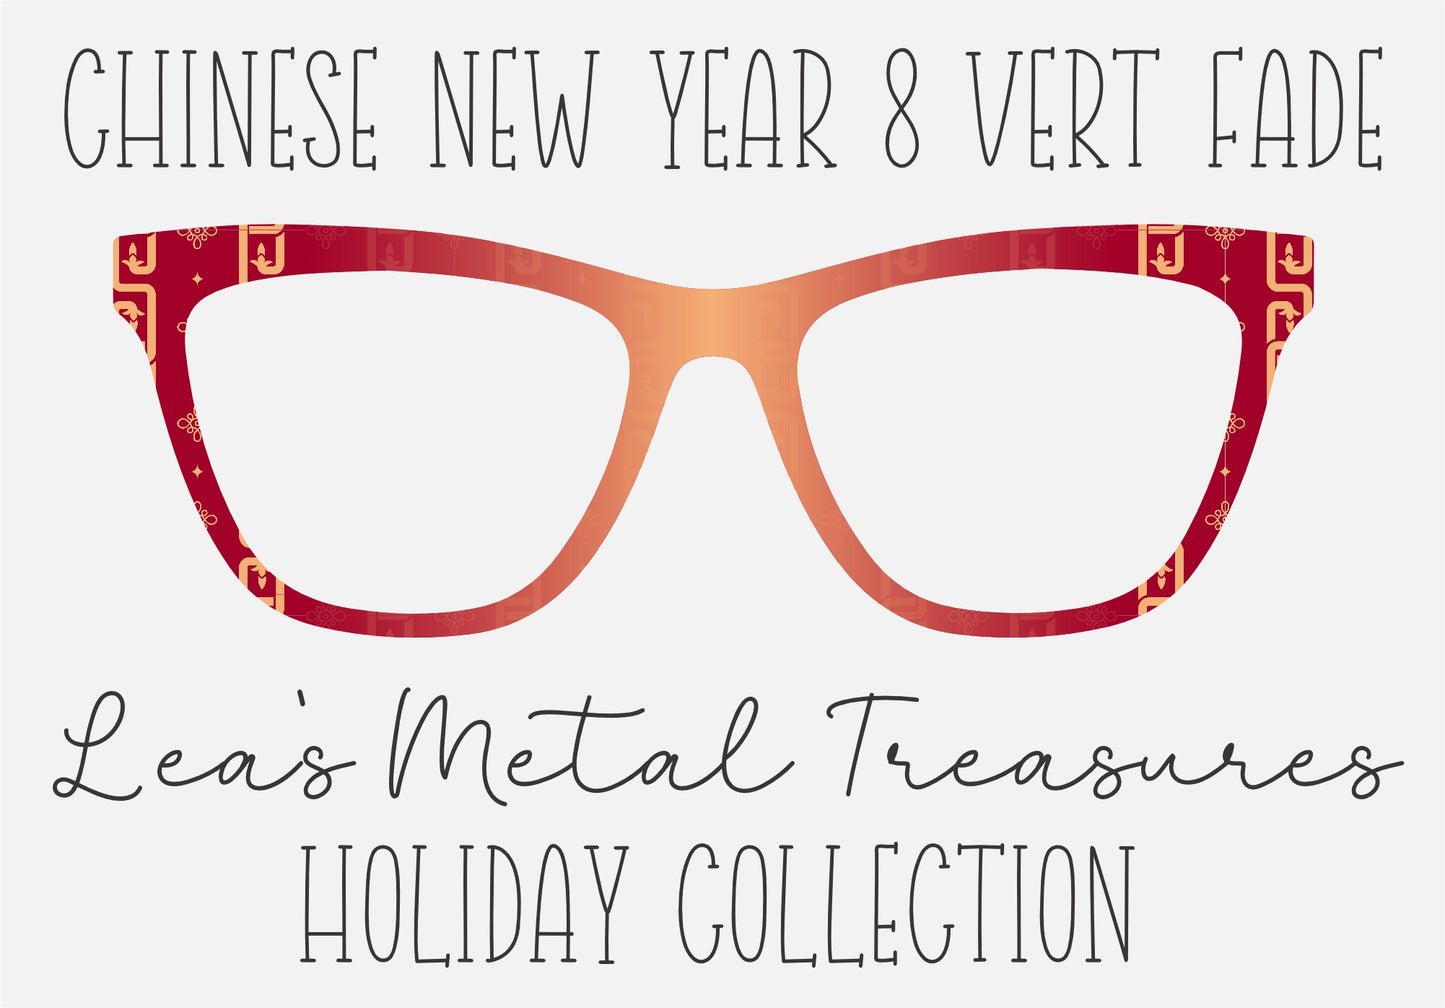 CHINESE NEW YEAR 8 VERT FADE Eyewear Frame Toppers COMES WITH MAGNETS